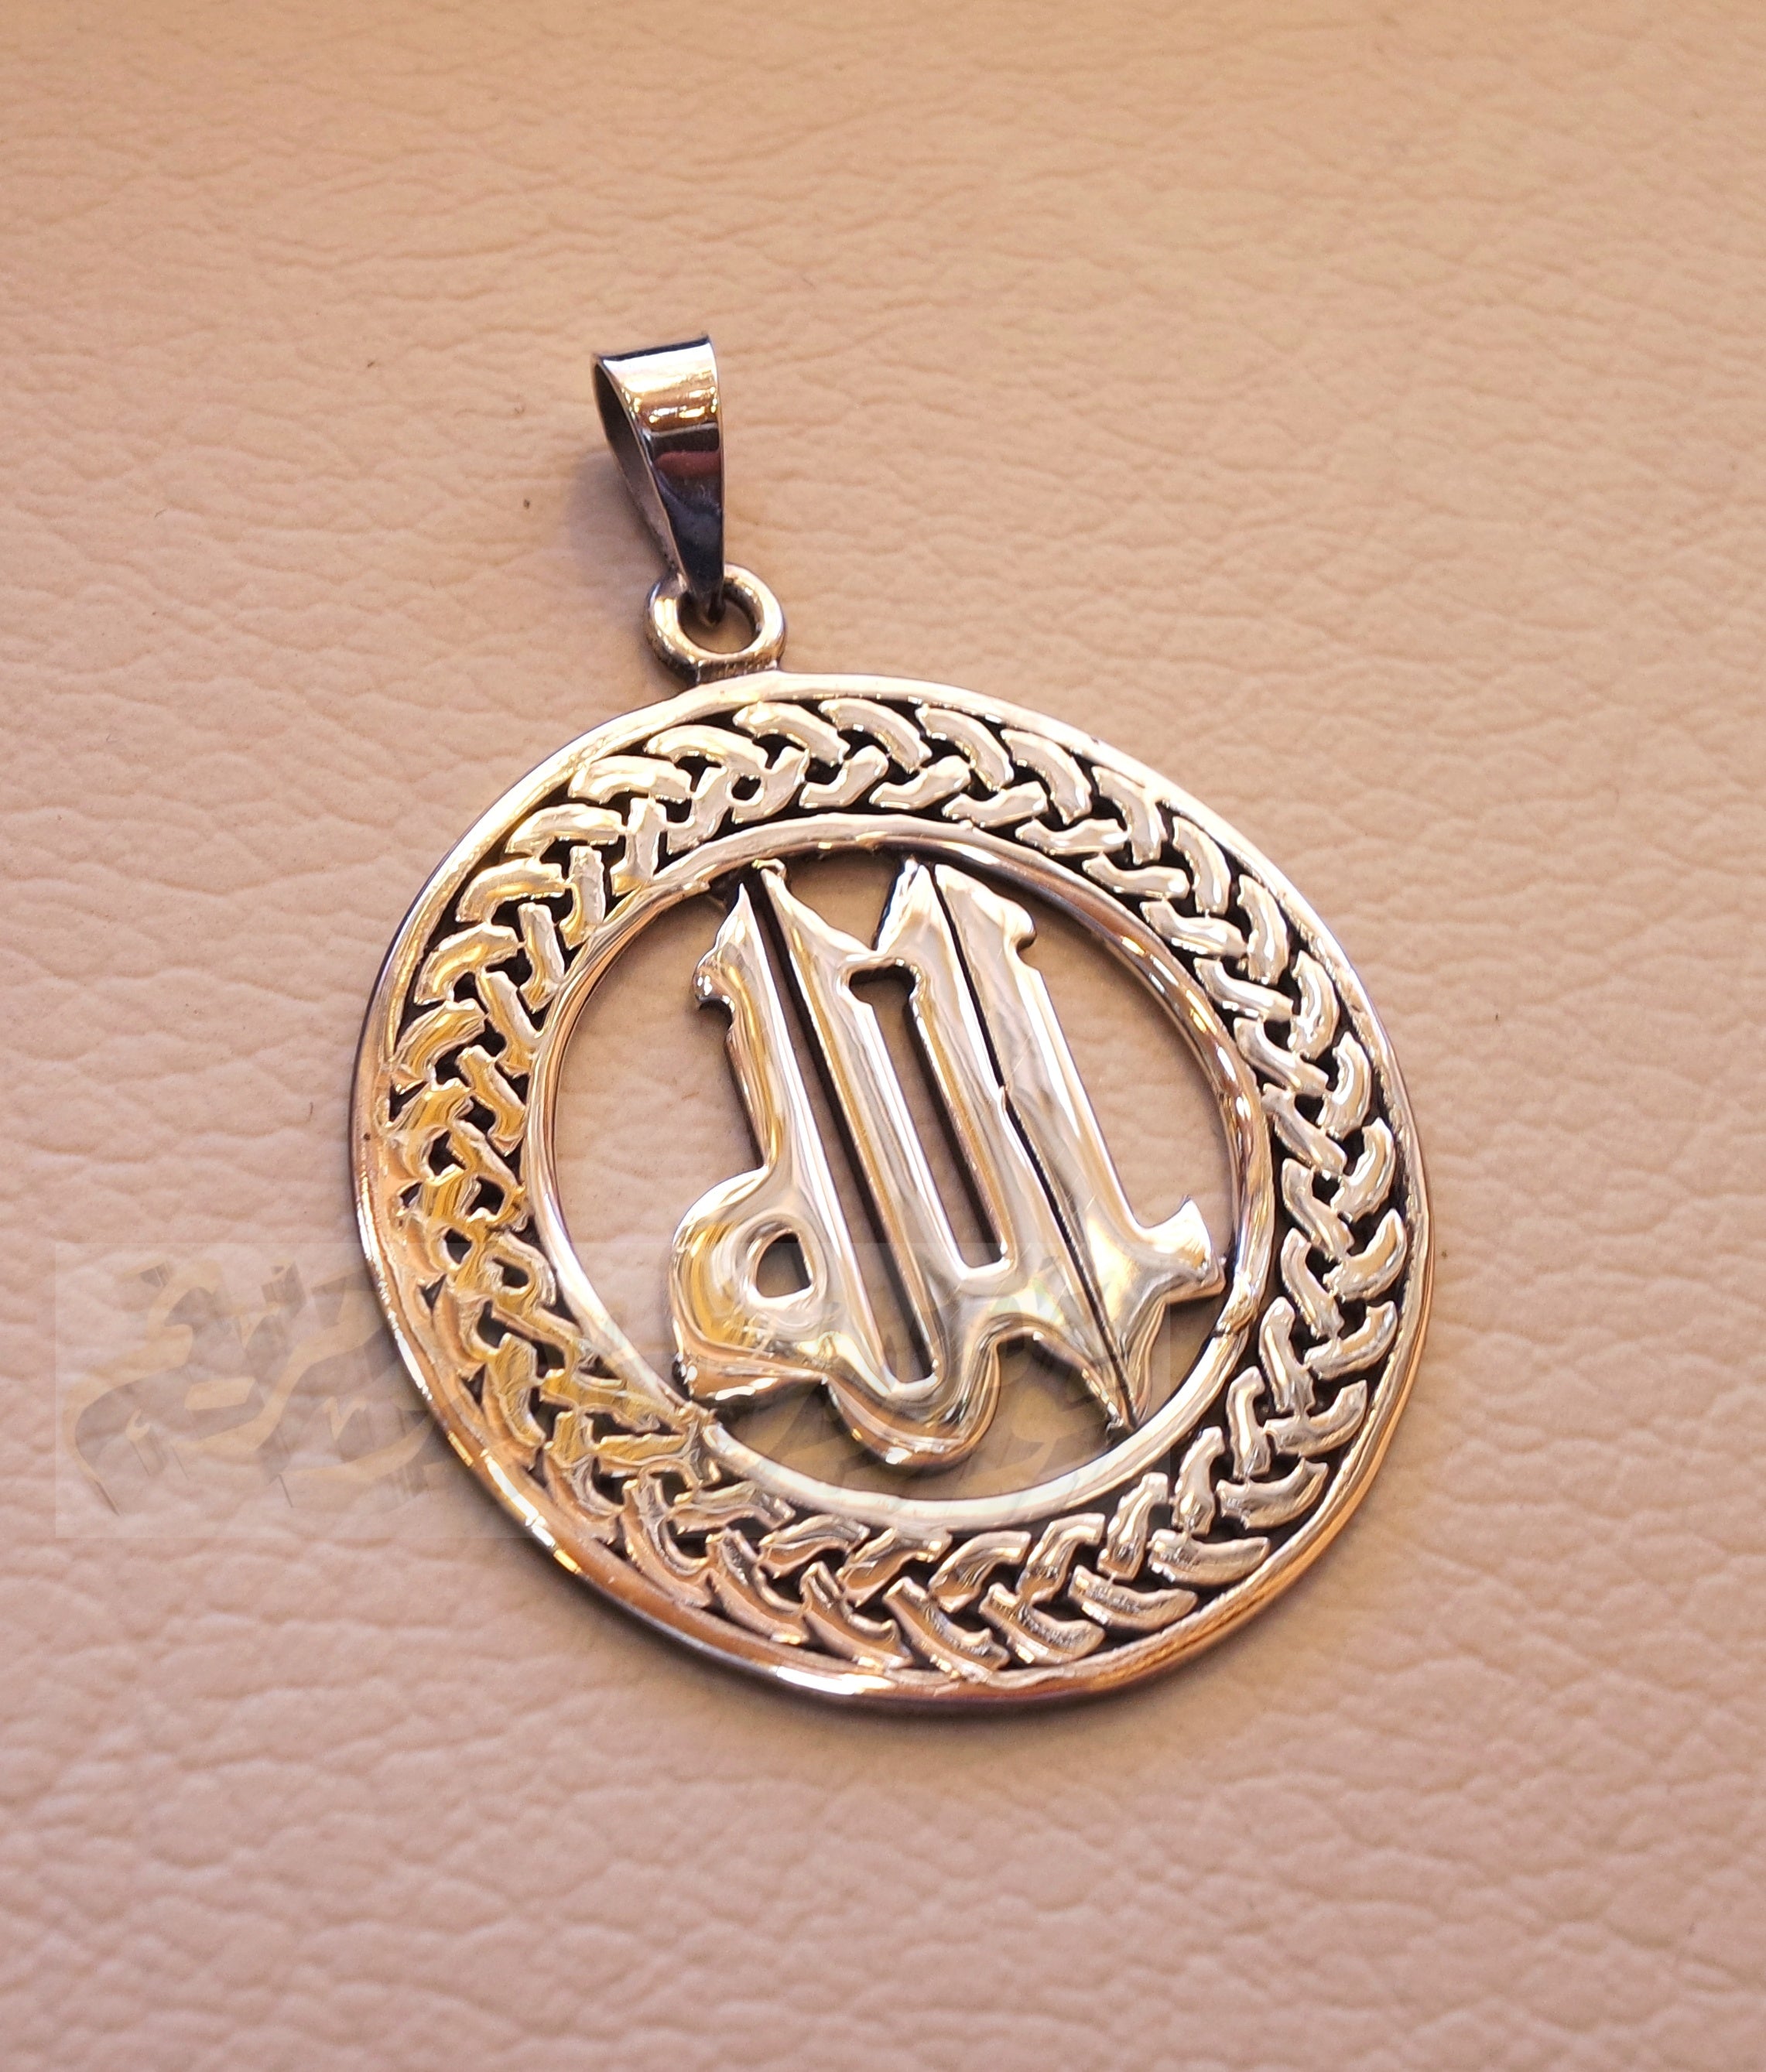 Round Allah pendant sterling silver 925 jewelry Islam vintage handmade heavy express shipping muslim religion